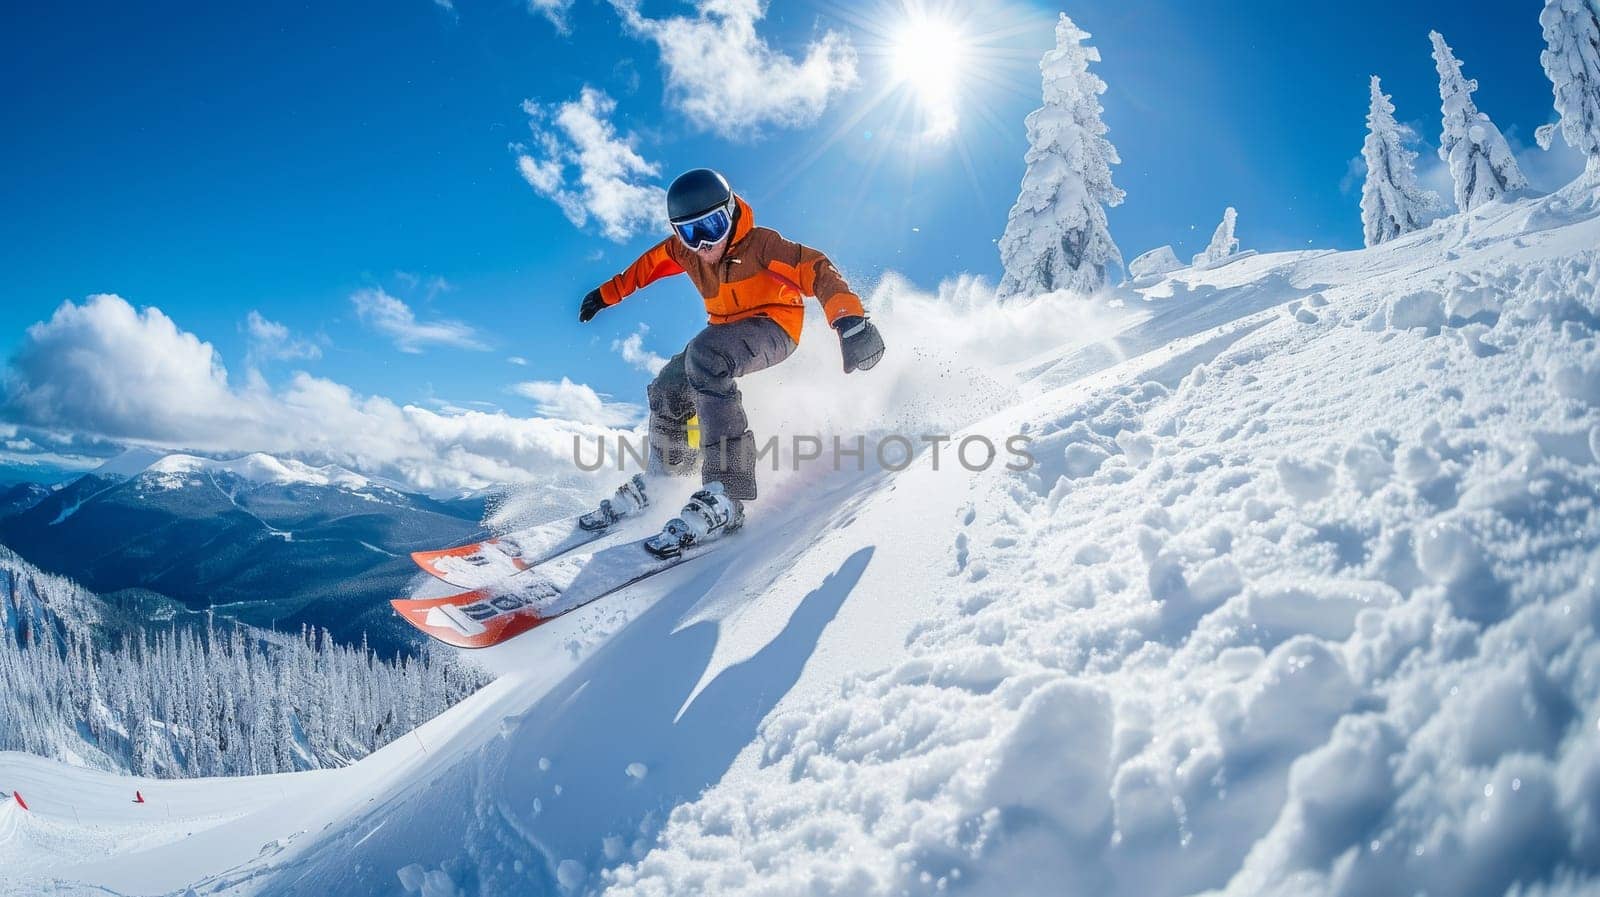 A snowboarder is in mid-air, performing a trick on a snow-covered slope by itchaznong